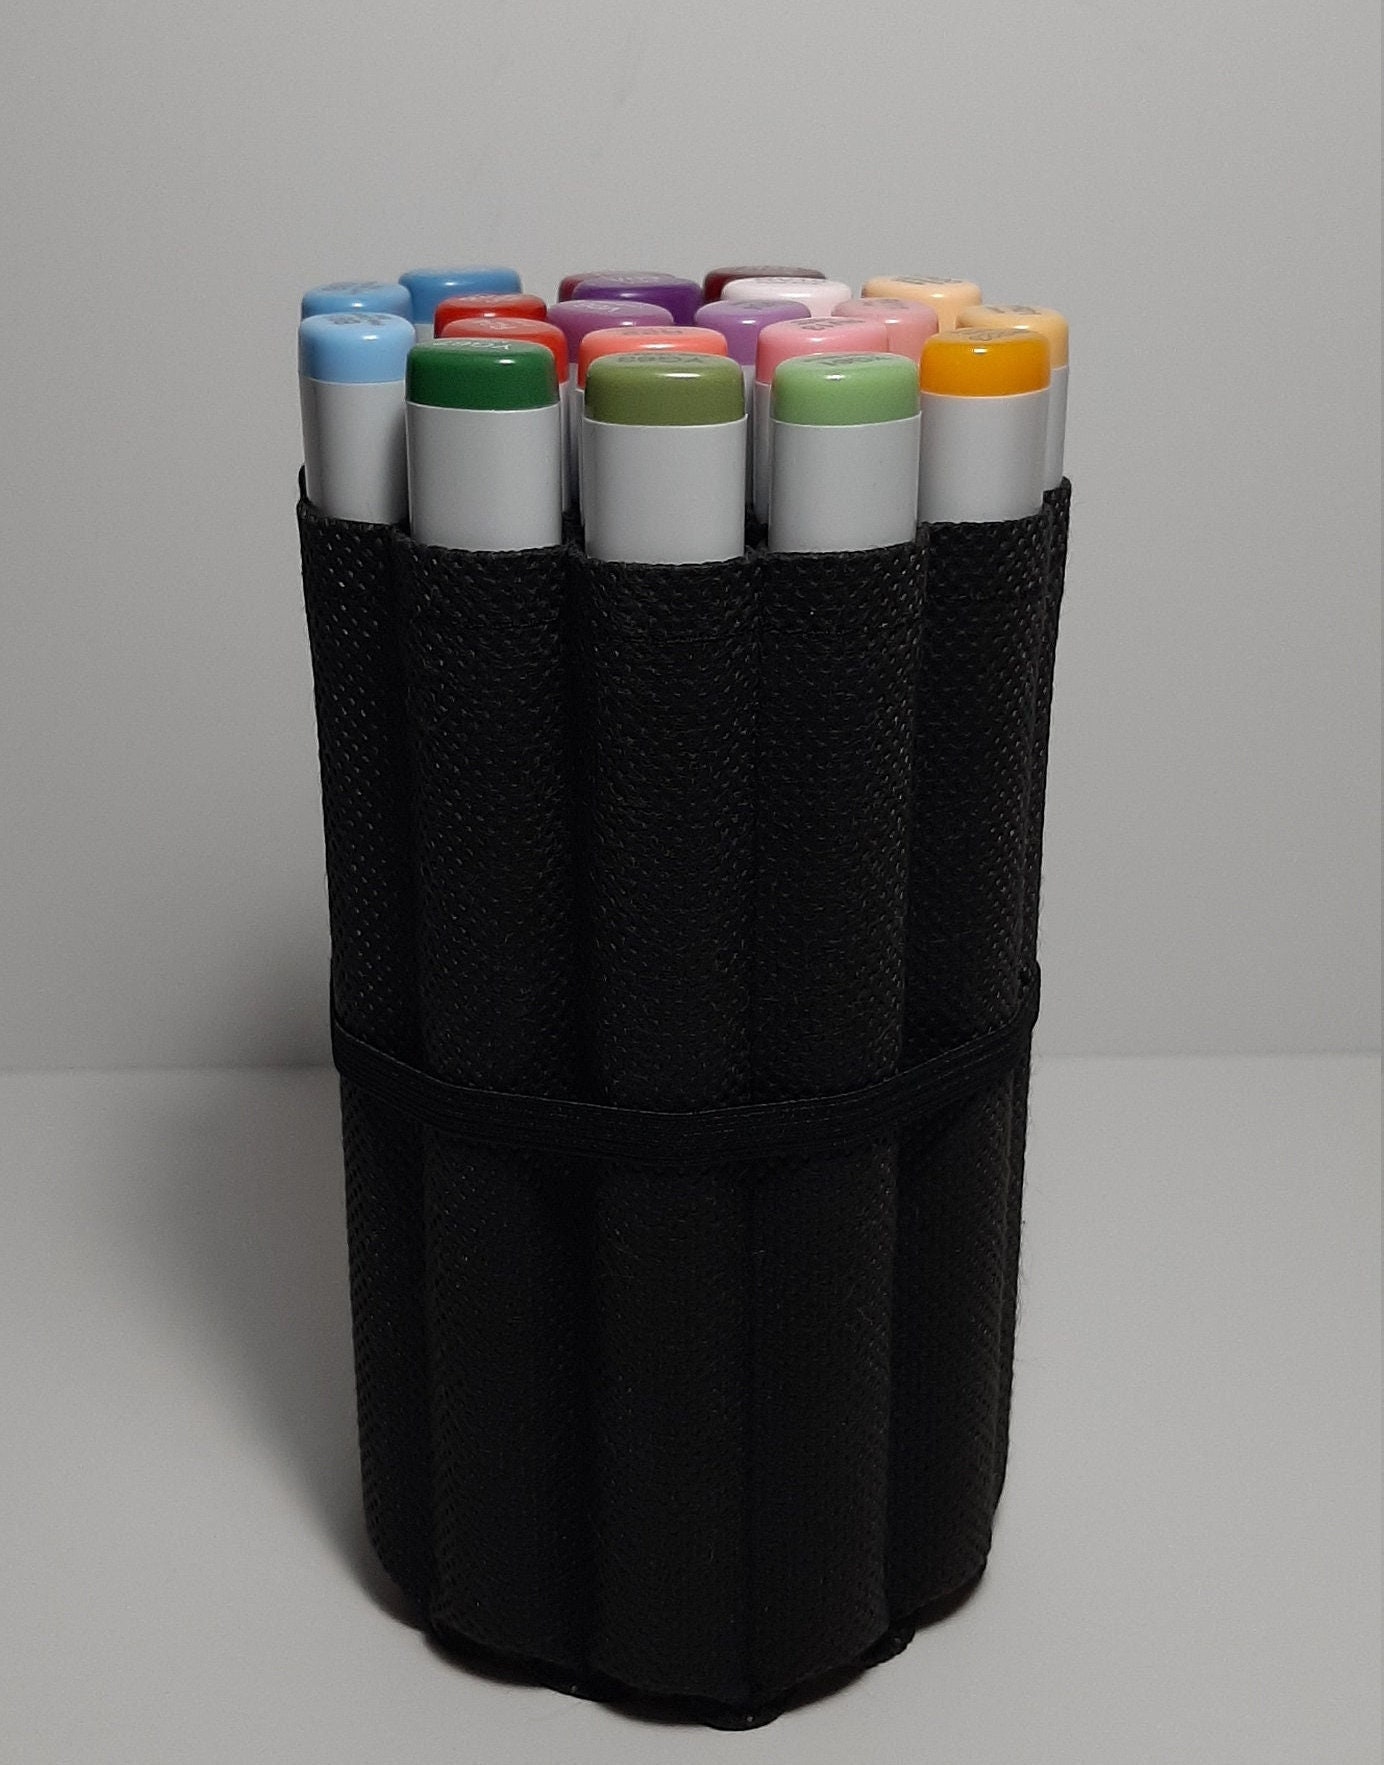 Marker Case, New 80/120/171 Slots Markers Carrying Bag Holder for Alcohol  Marker and Art